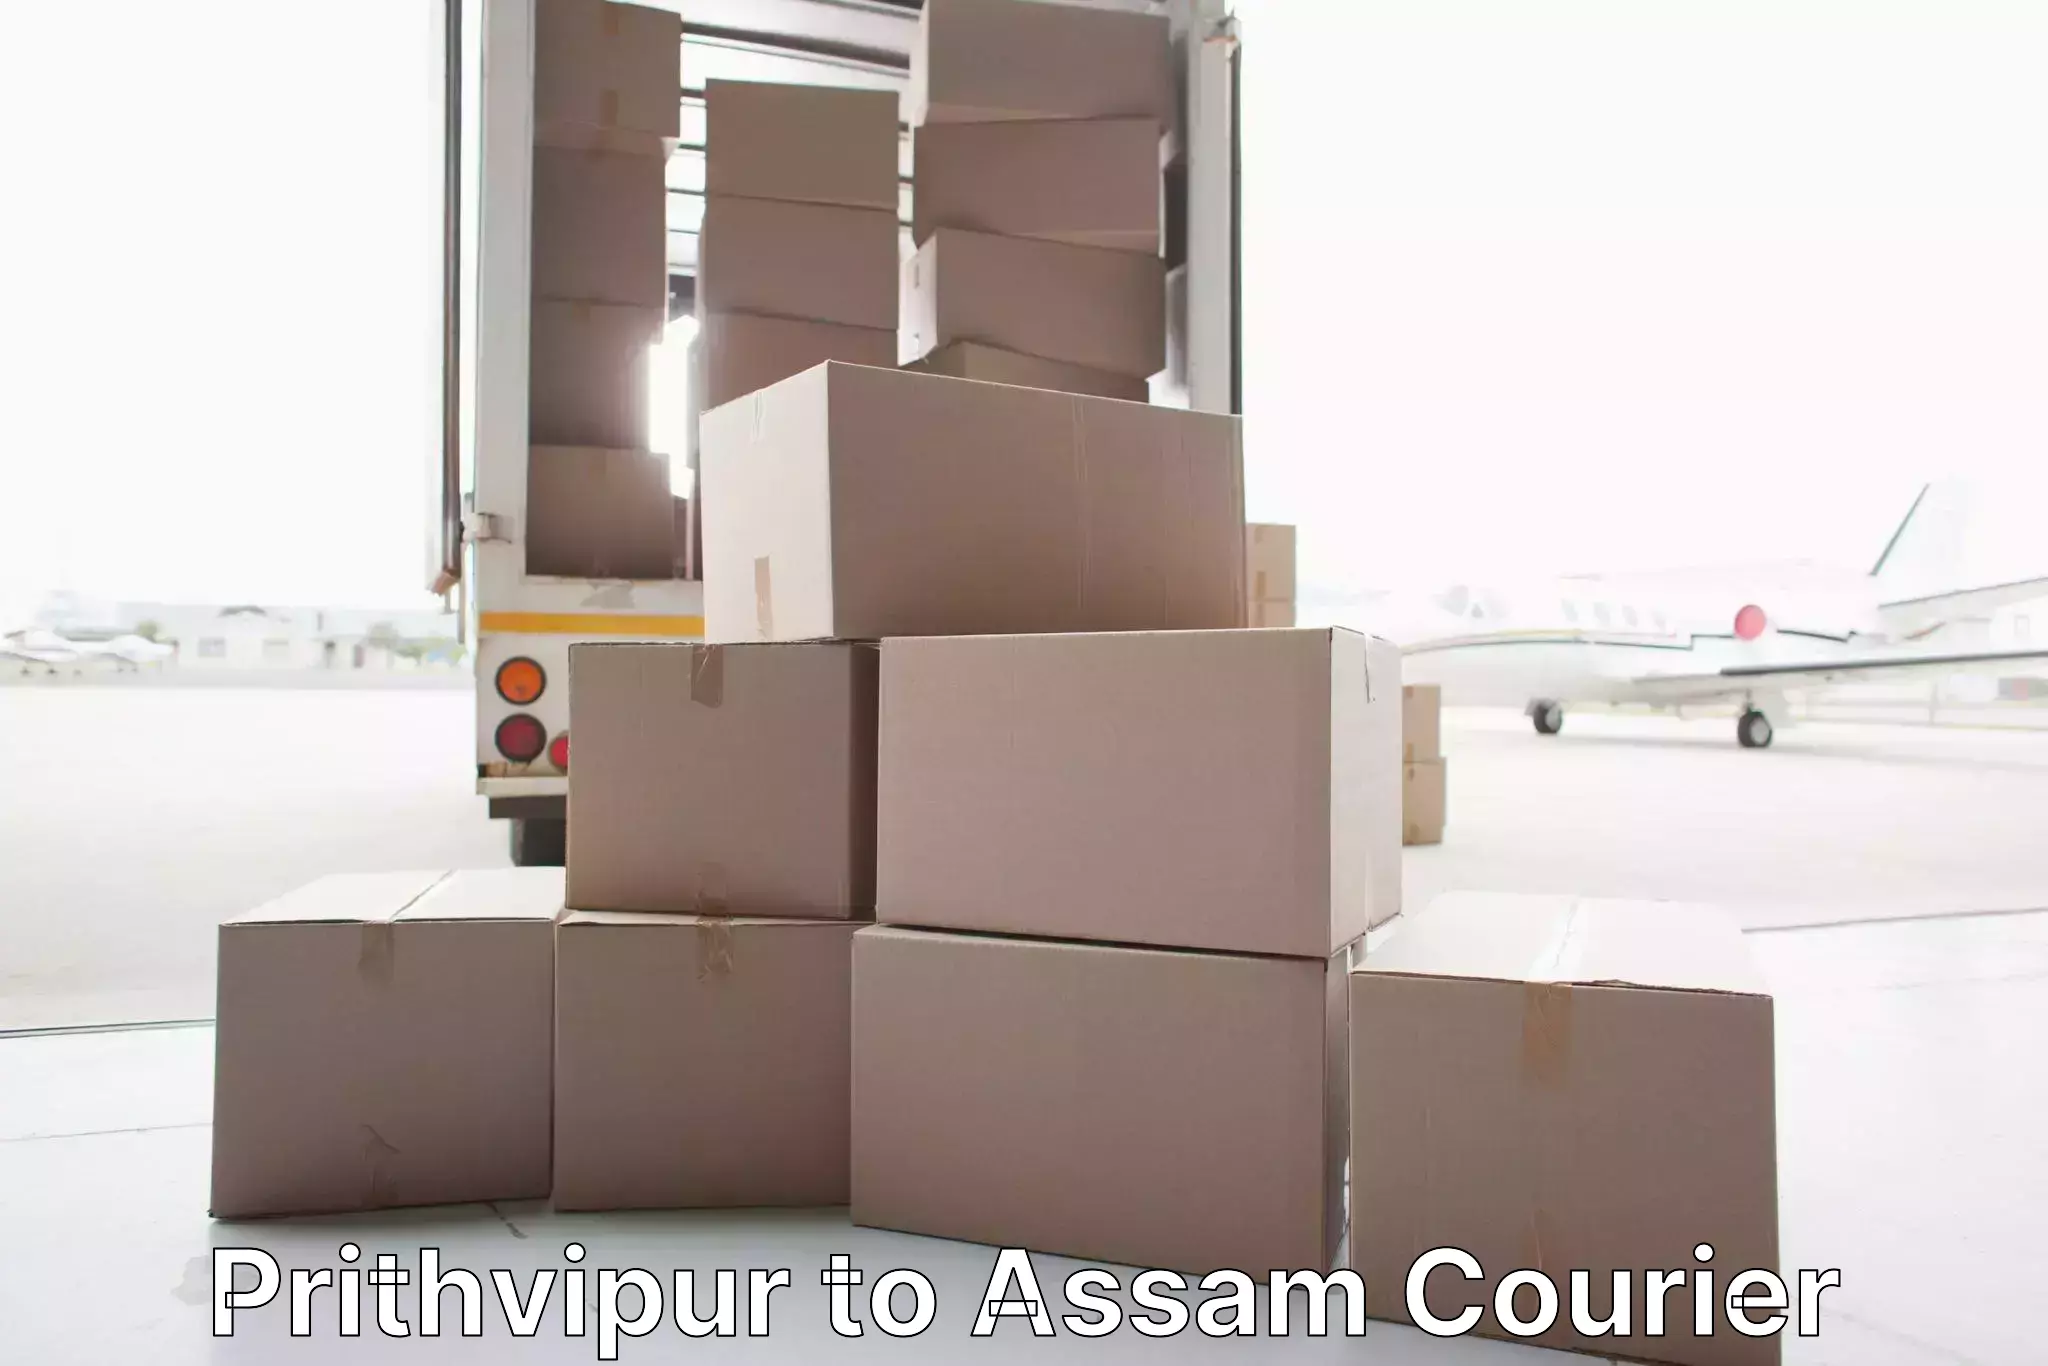 Budget-friendly movers Prithvipur to Kampur